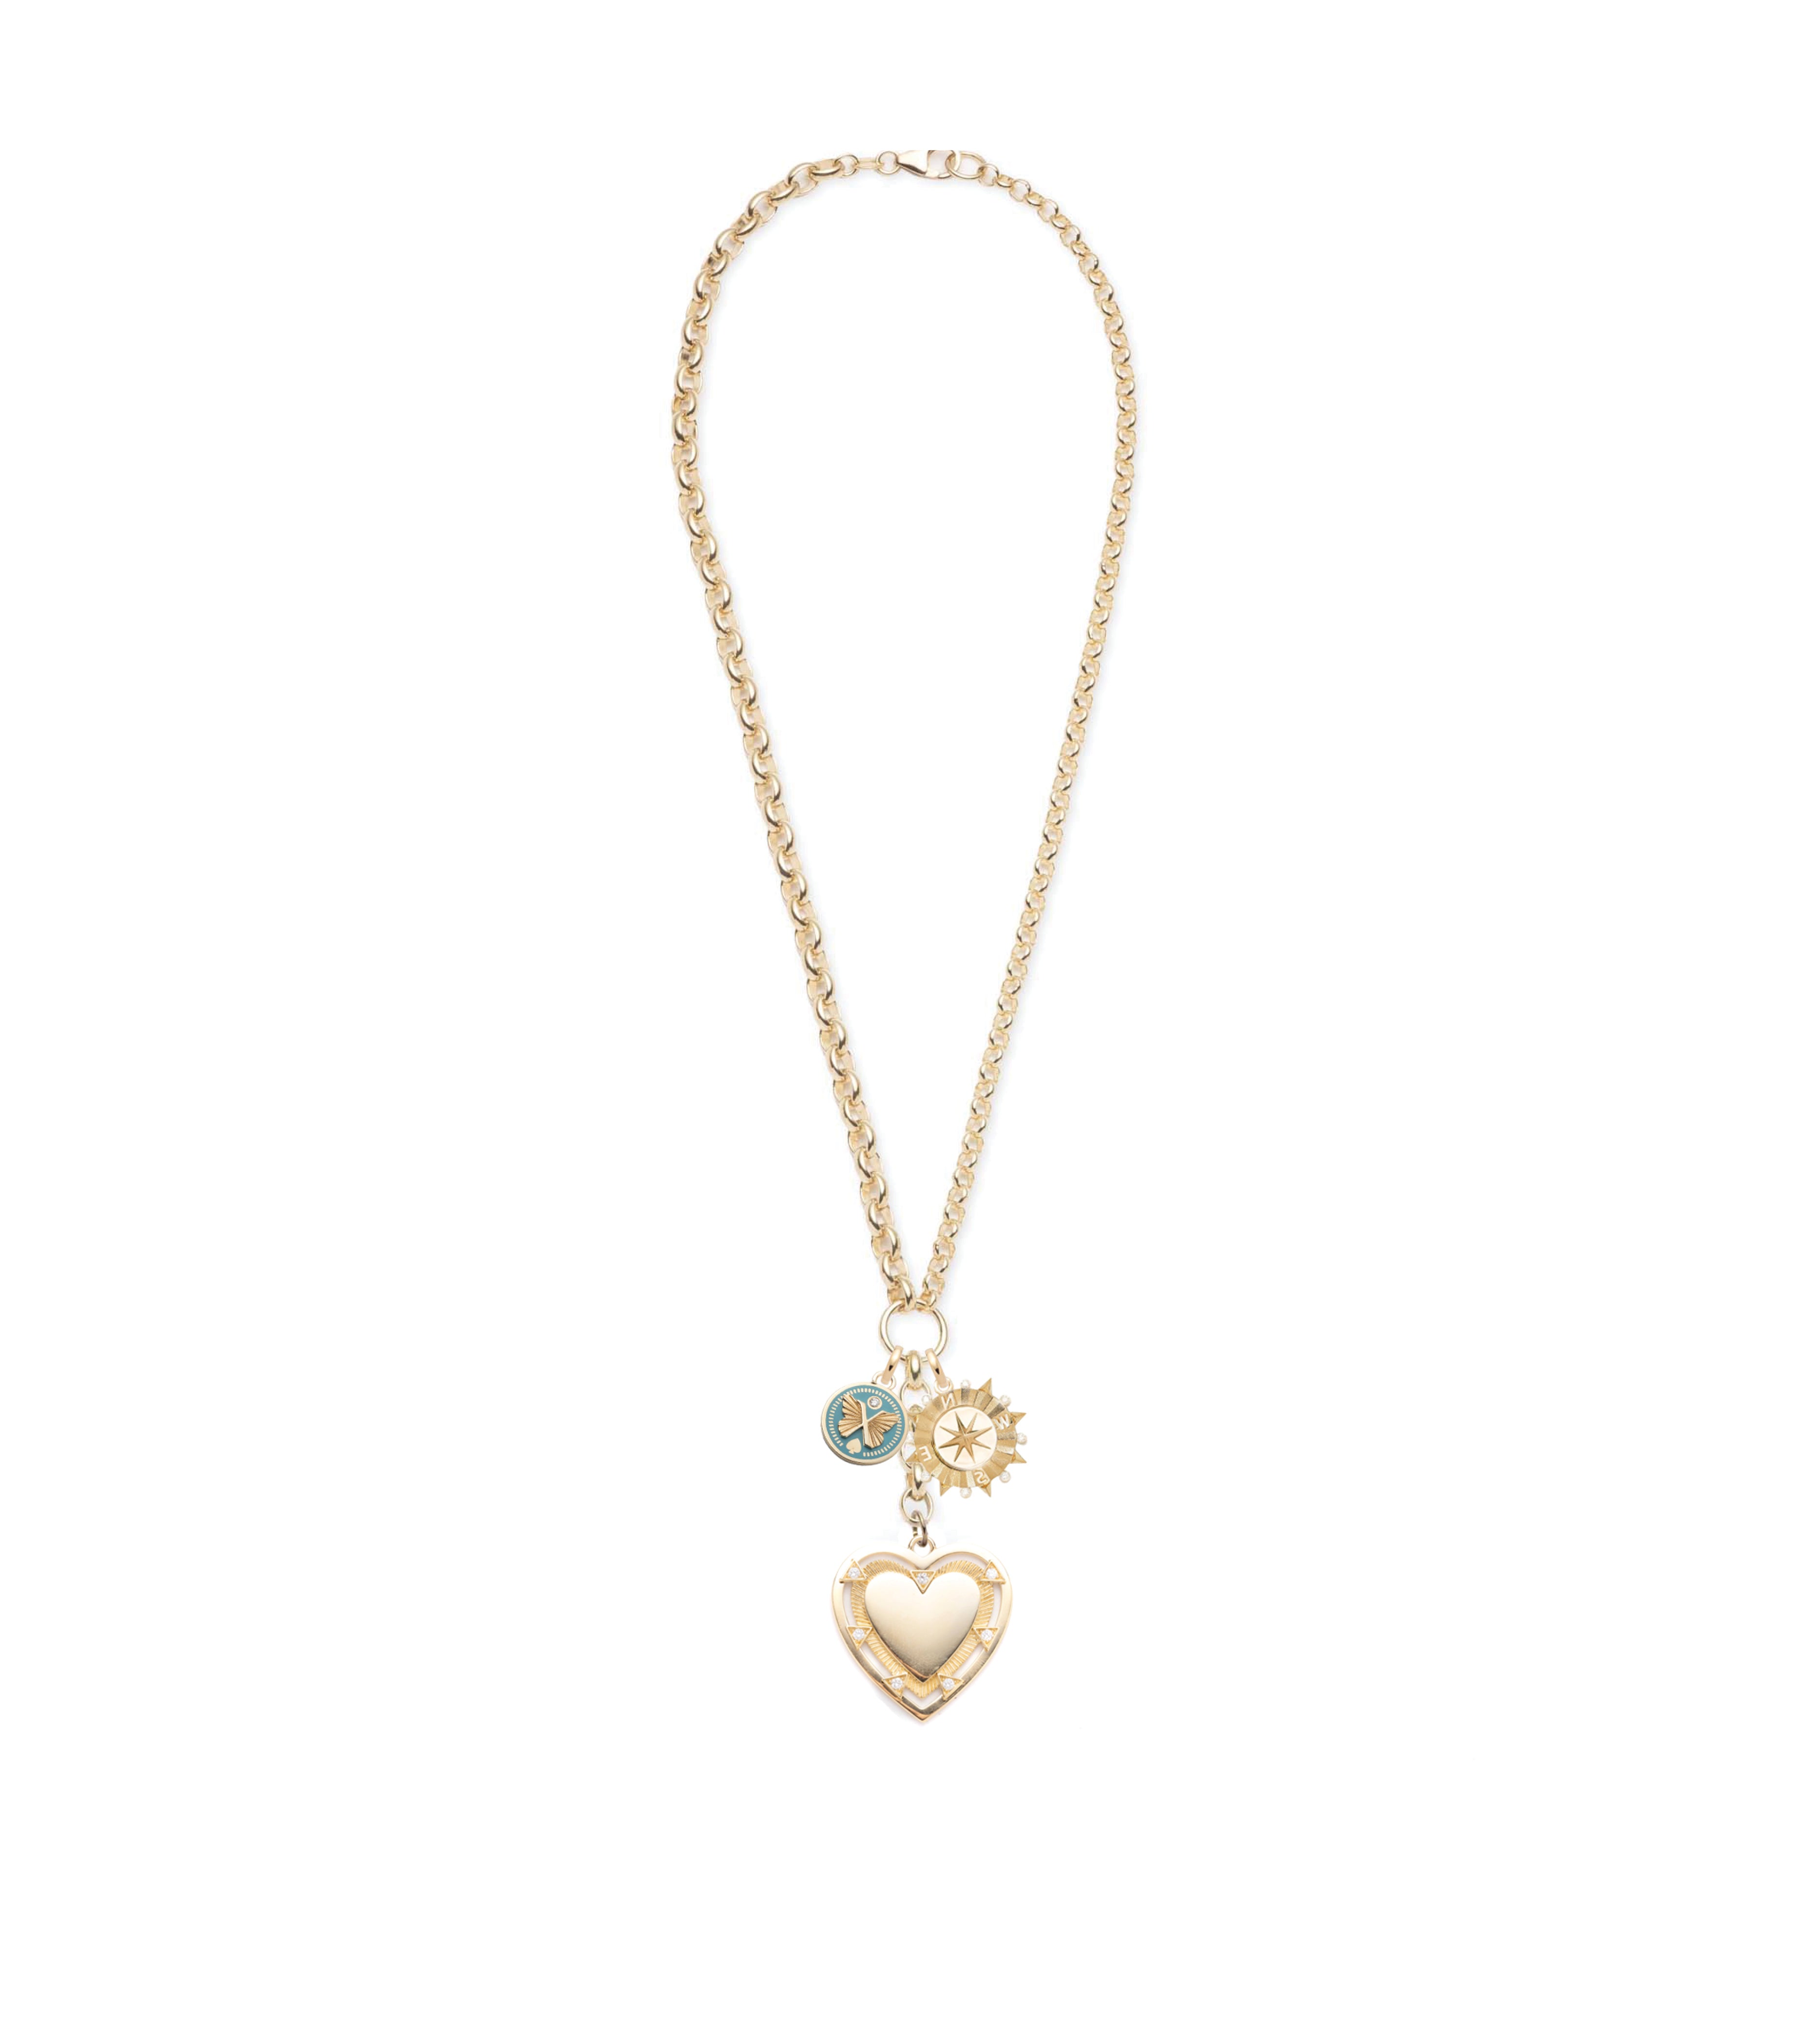 Love, Internal Compass & Reverie : Heavy Mixed Belcher Extension Chain Necklace Story